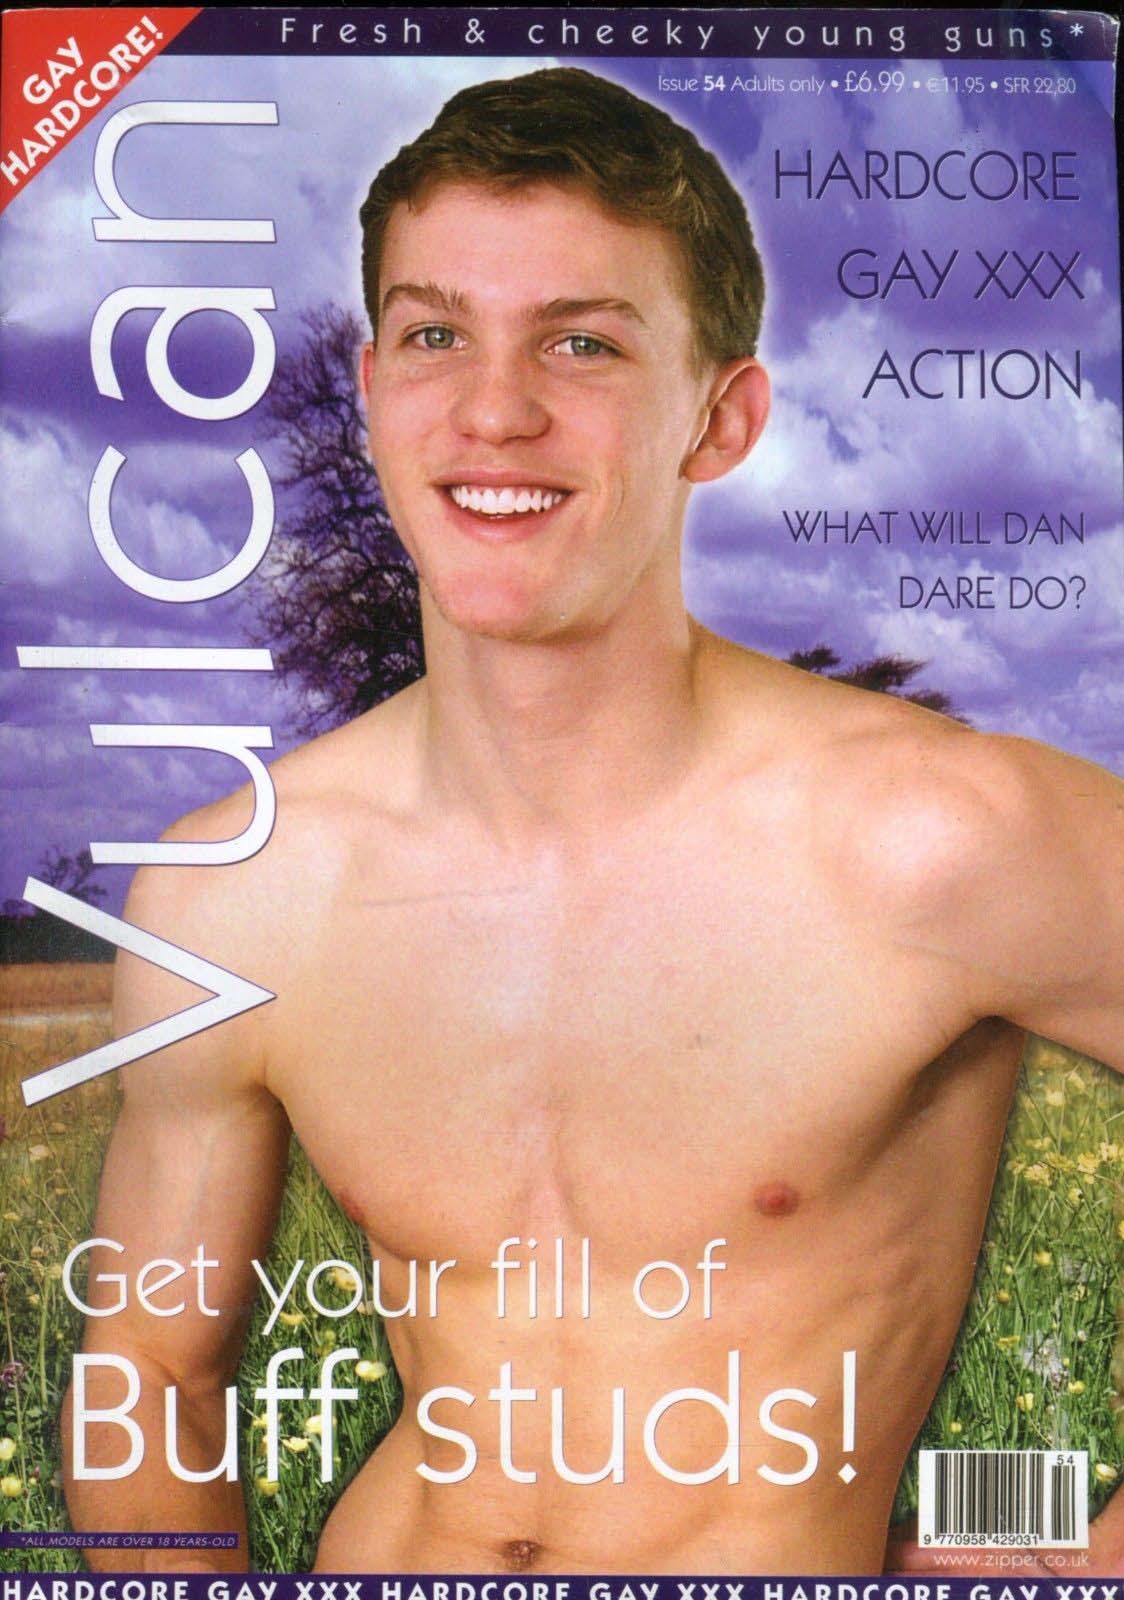 Vulcan # 54 magazine back issue Vulcan magizine back copy Vulcan # 54 Gay Adult Pornographic Magazine Back Issue Made Famous by Serial Killer Dennis Nilsen. Gay Hardcore!.